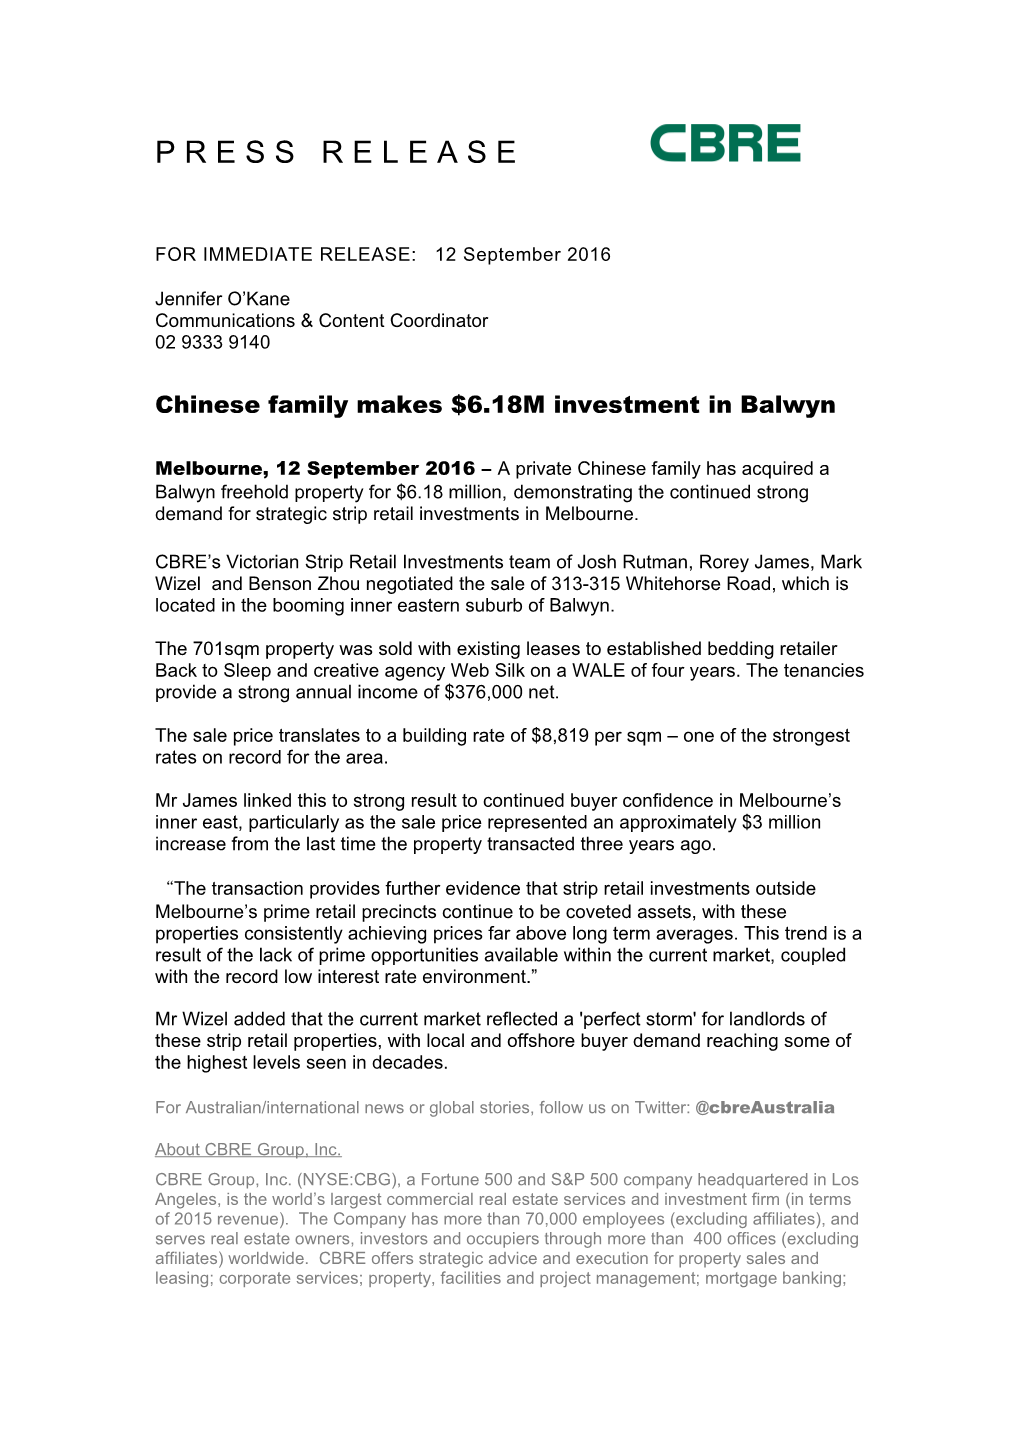 Chinese Family Makes $6.18M Investment in Balwyn